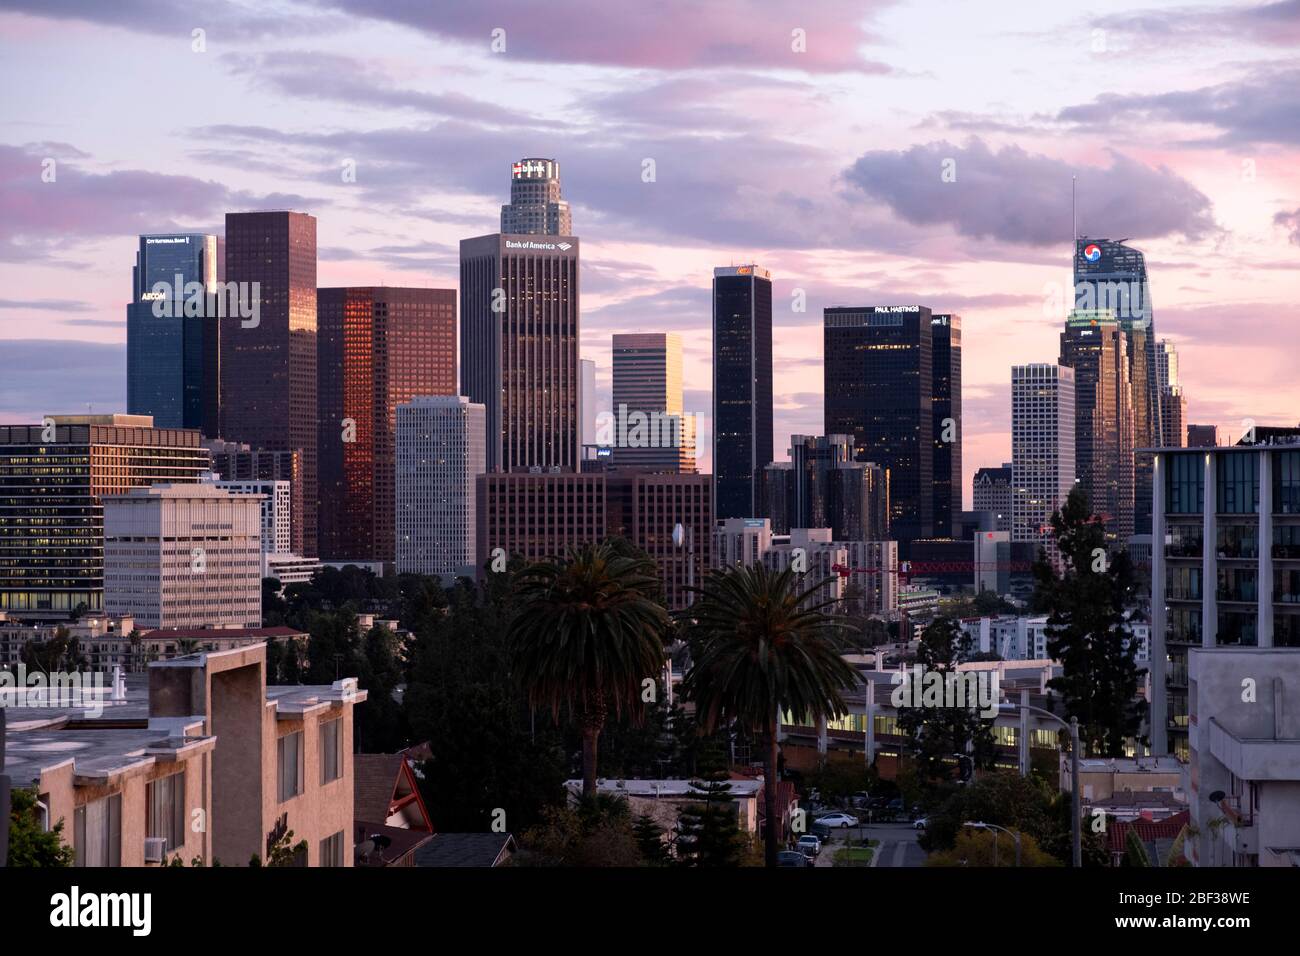 Skyline of Los Angeles at sunset with colorful pink and golden clouds in the sky as viewed from Angelino Heights neighborhood Stock Photo